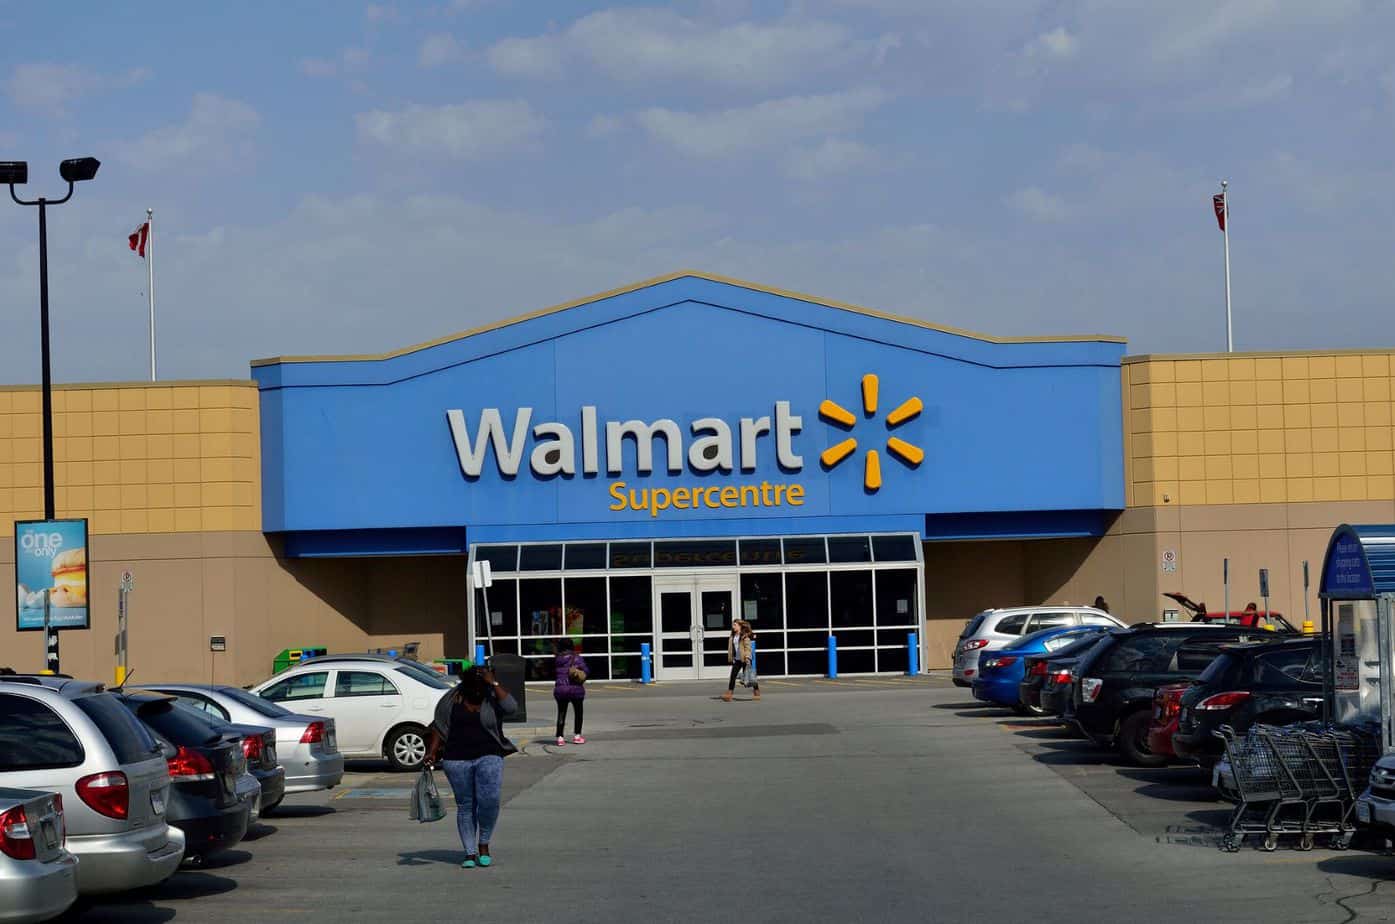 Why did Walmart stop Overnight camping?